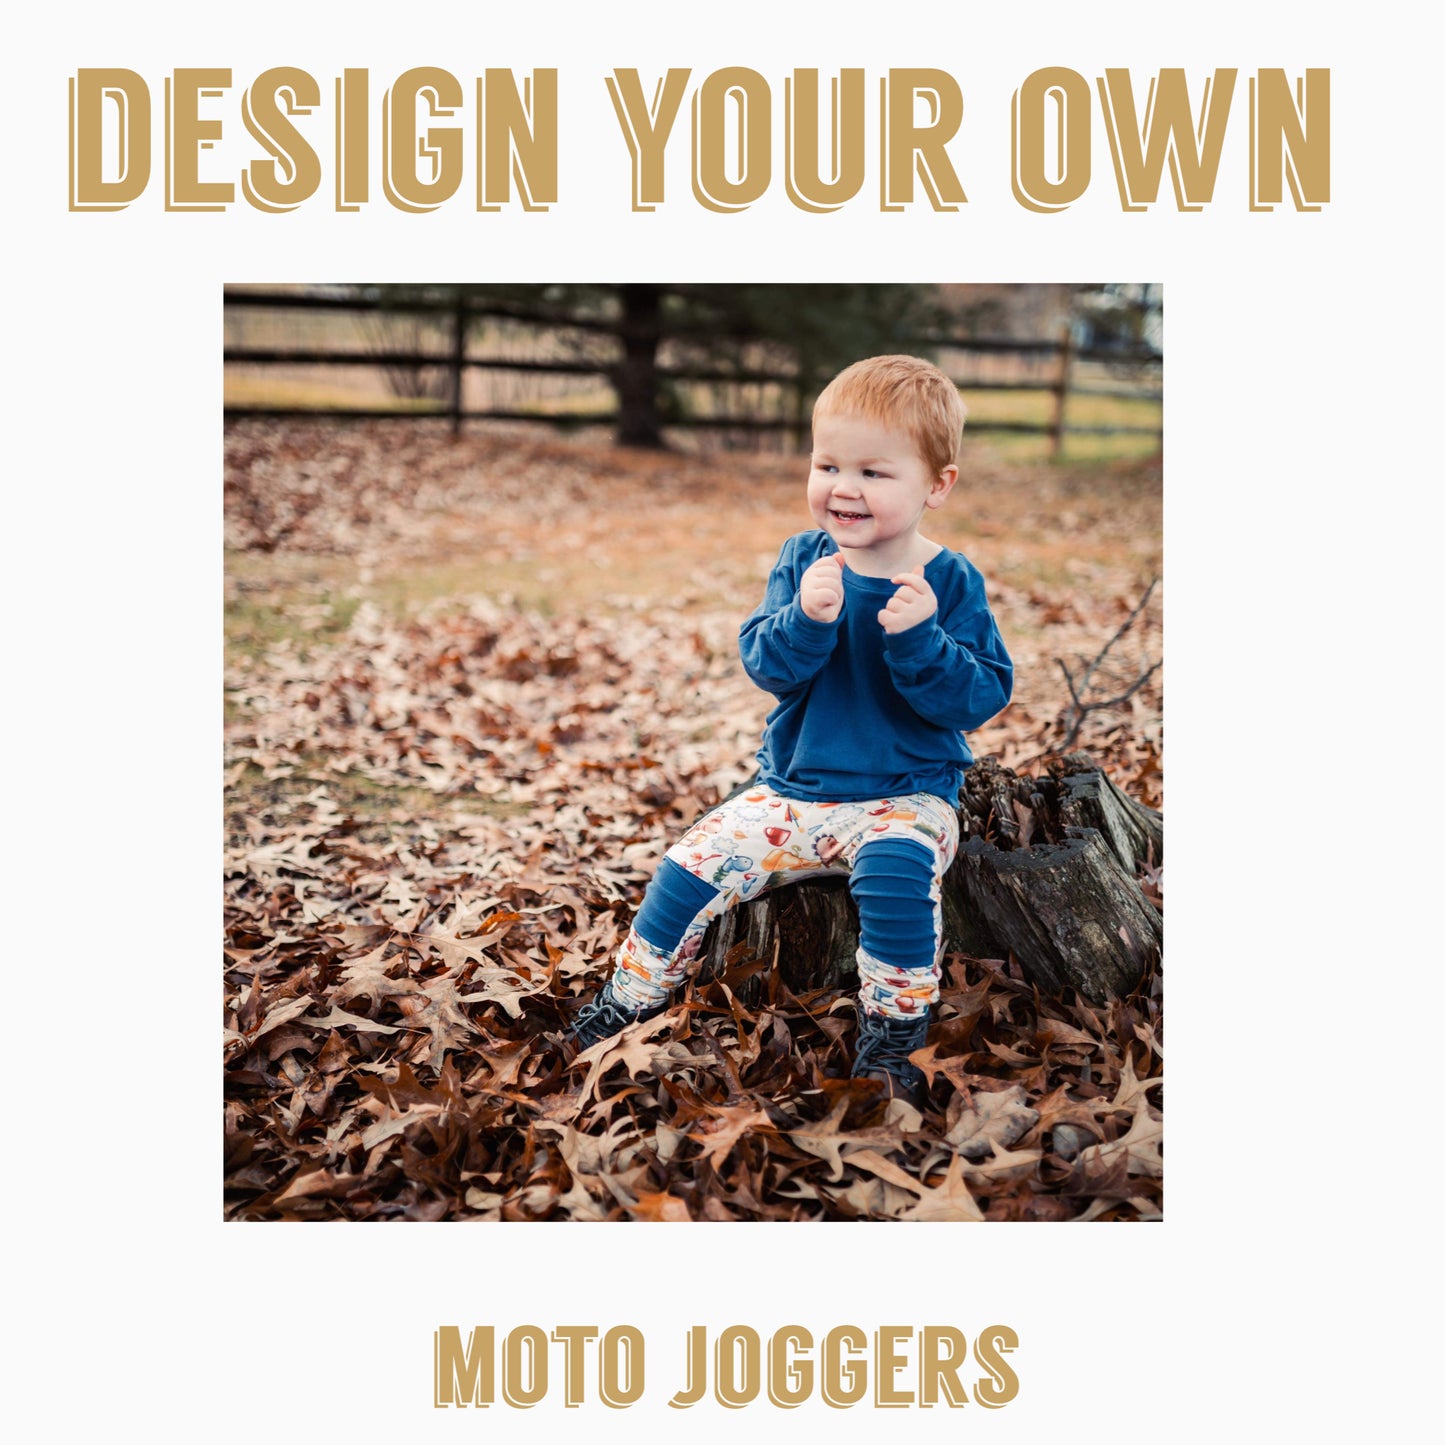 Design Your Own | moto Joggers